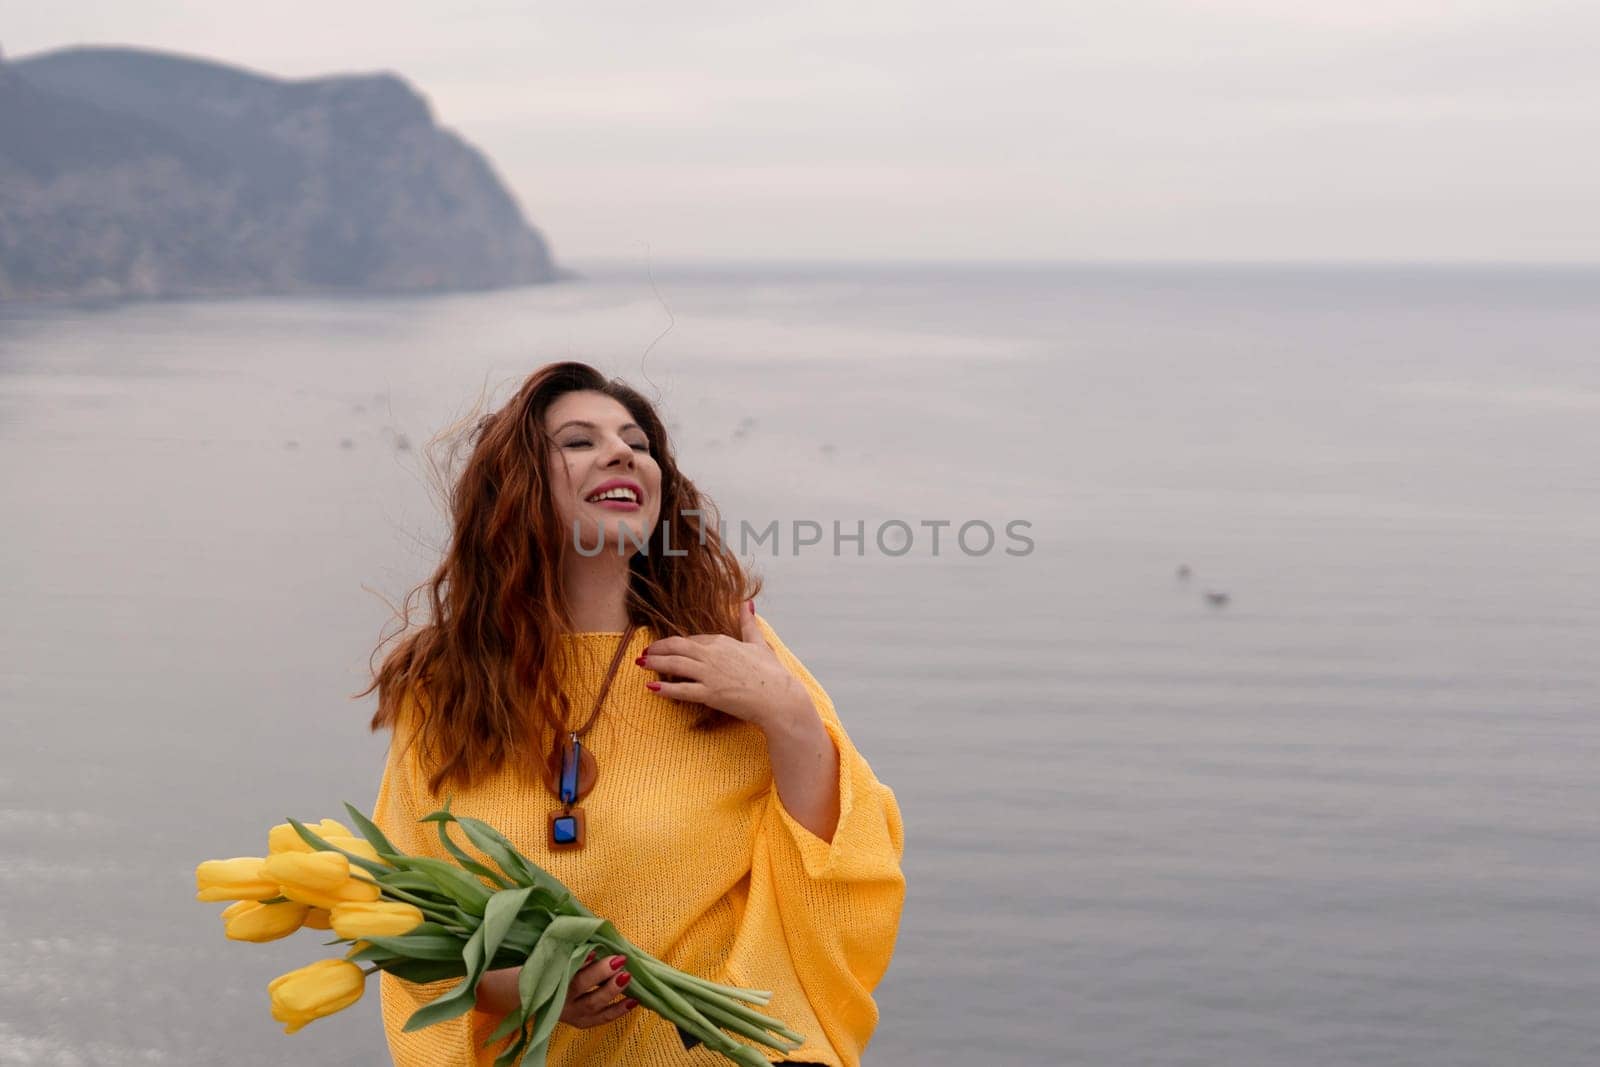 Portrait happy woman woman with long hair against a background of mountains and sea. Holding a bouquet of yellow tulips in her hands, wearing a yellow sweater.